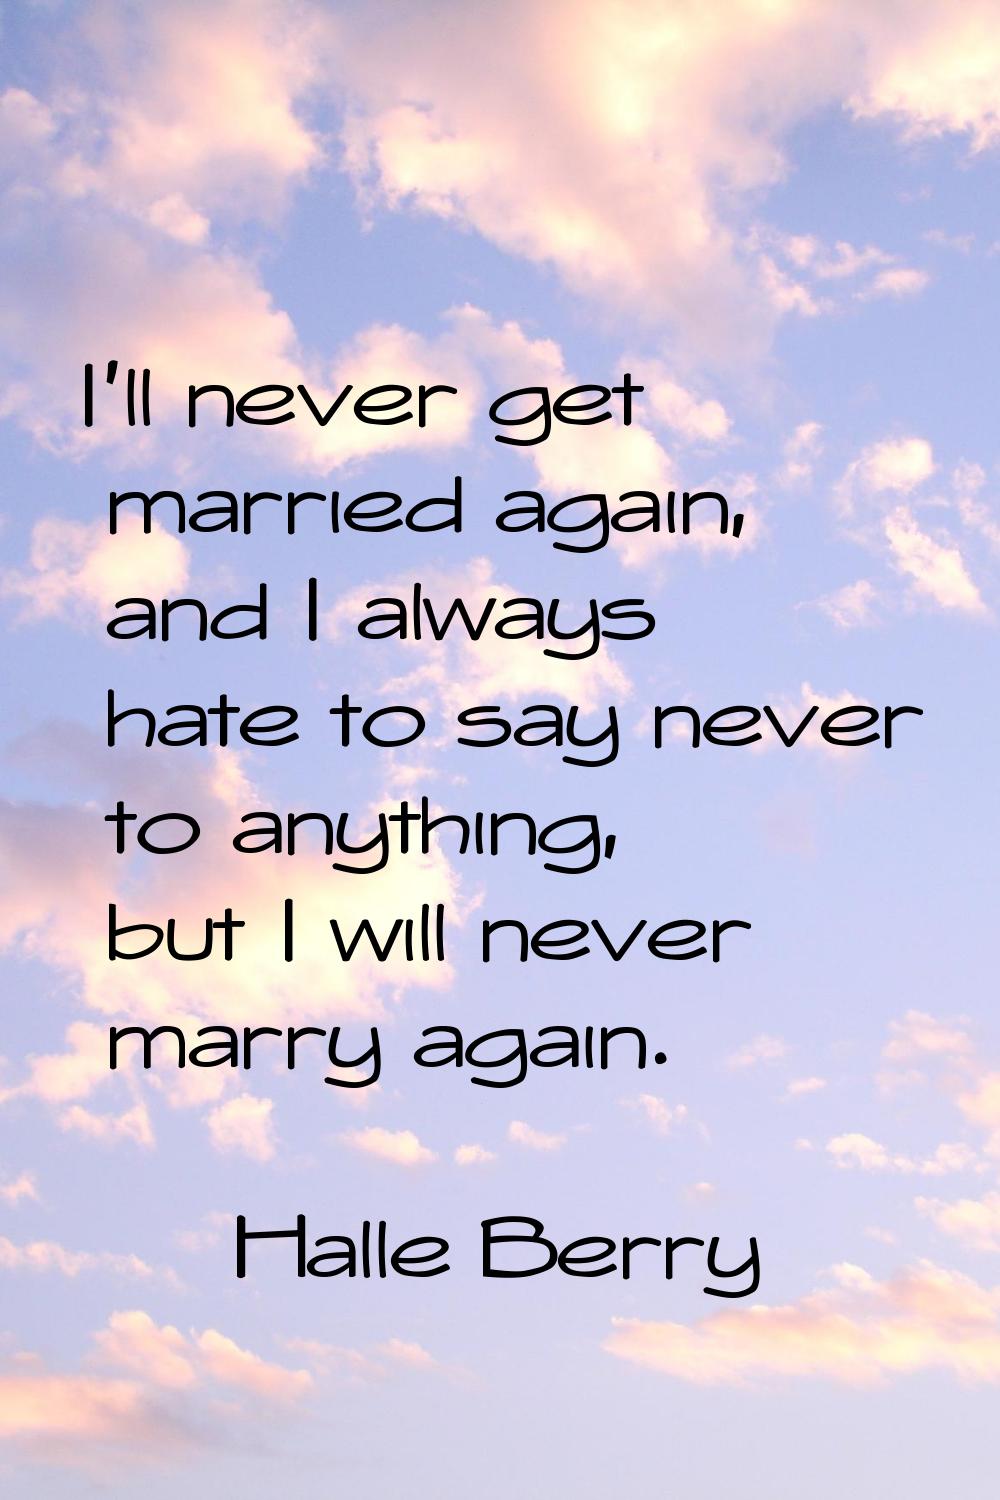 I'll never get married again, and I always hate to say never to anything, but I will never marry ag